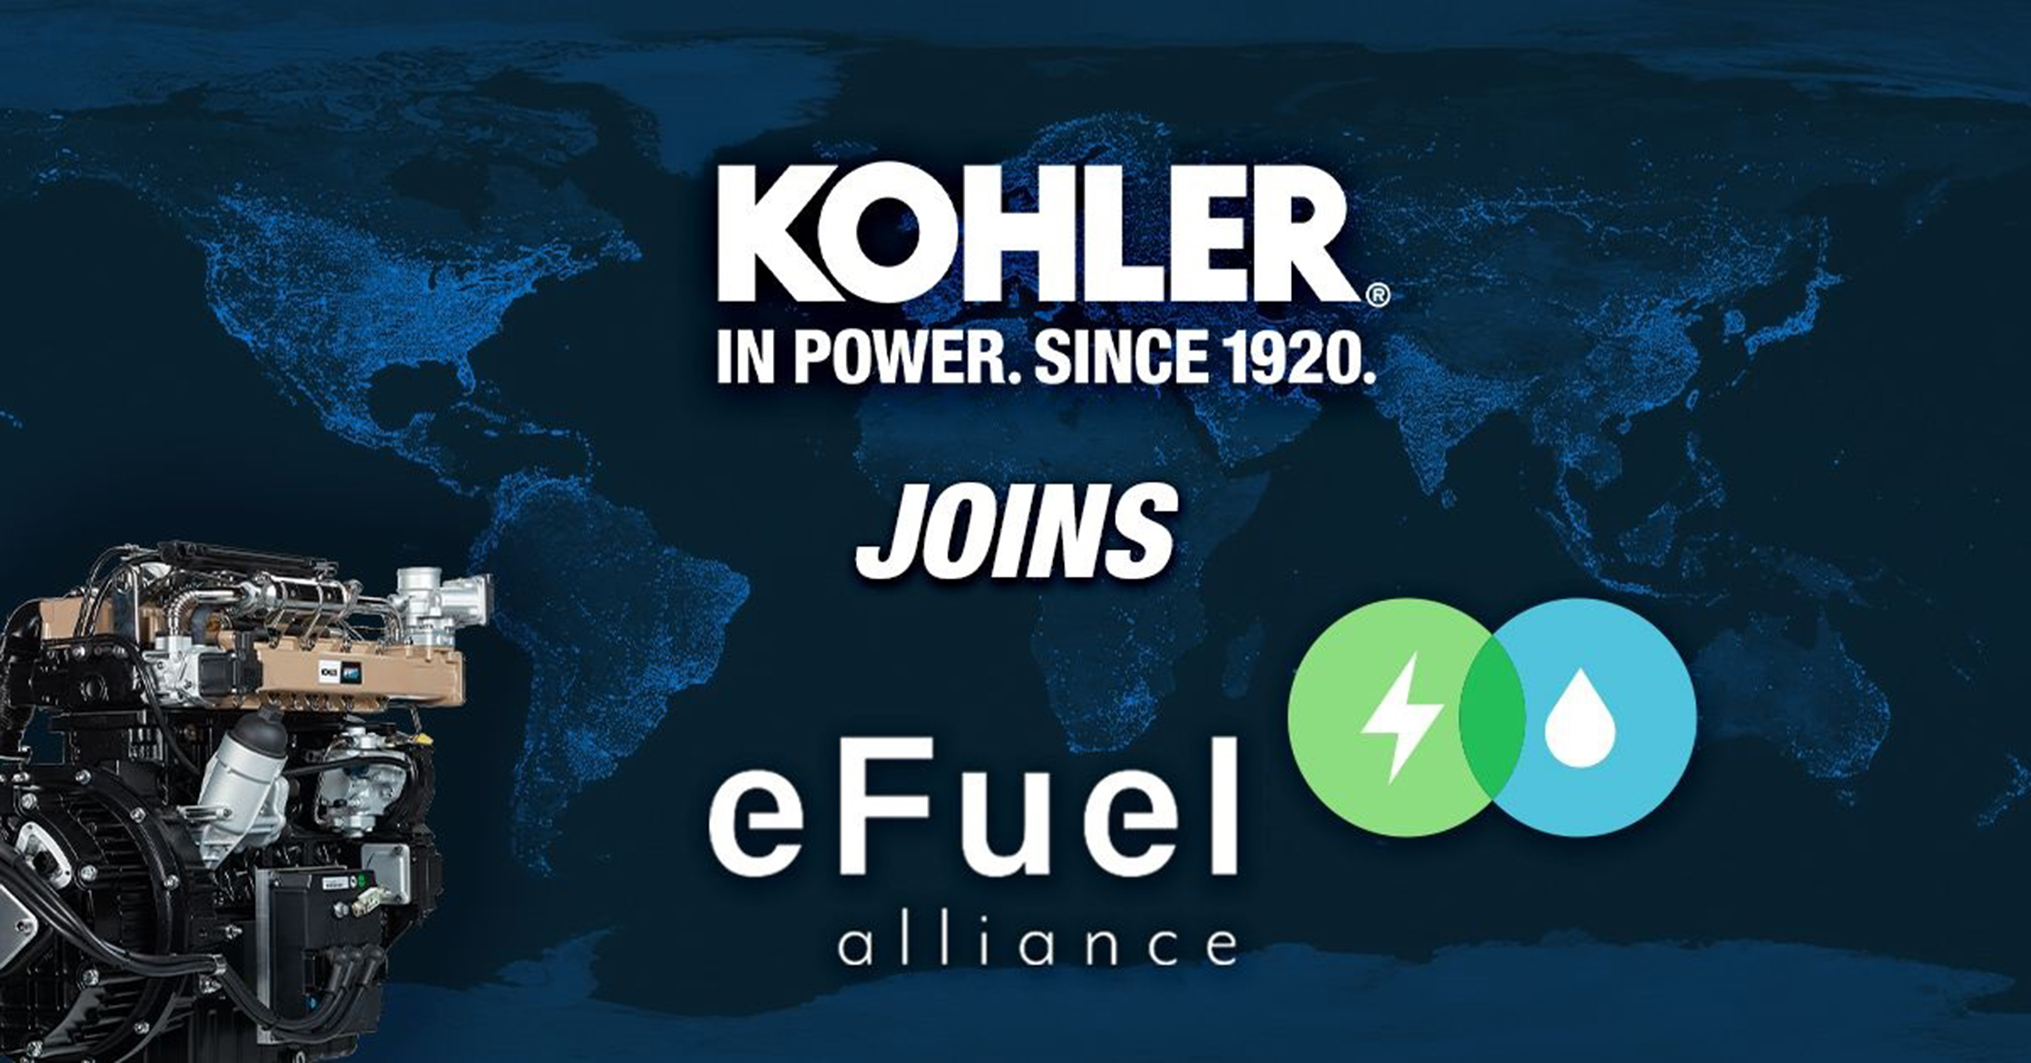 The partnership between the eFuel Alliance and Kohler aims to increase the use of sustainable biogenic fuels in the off-road engine sector